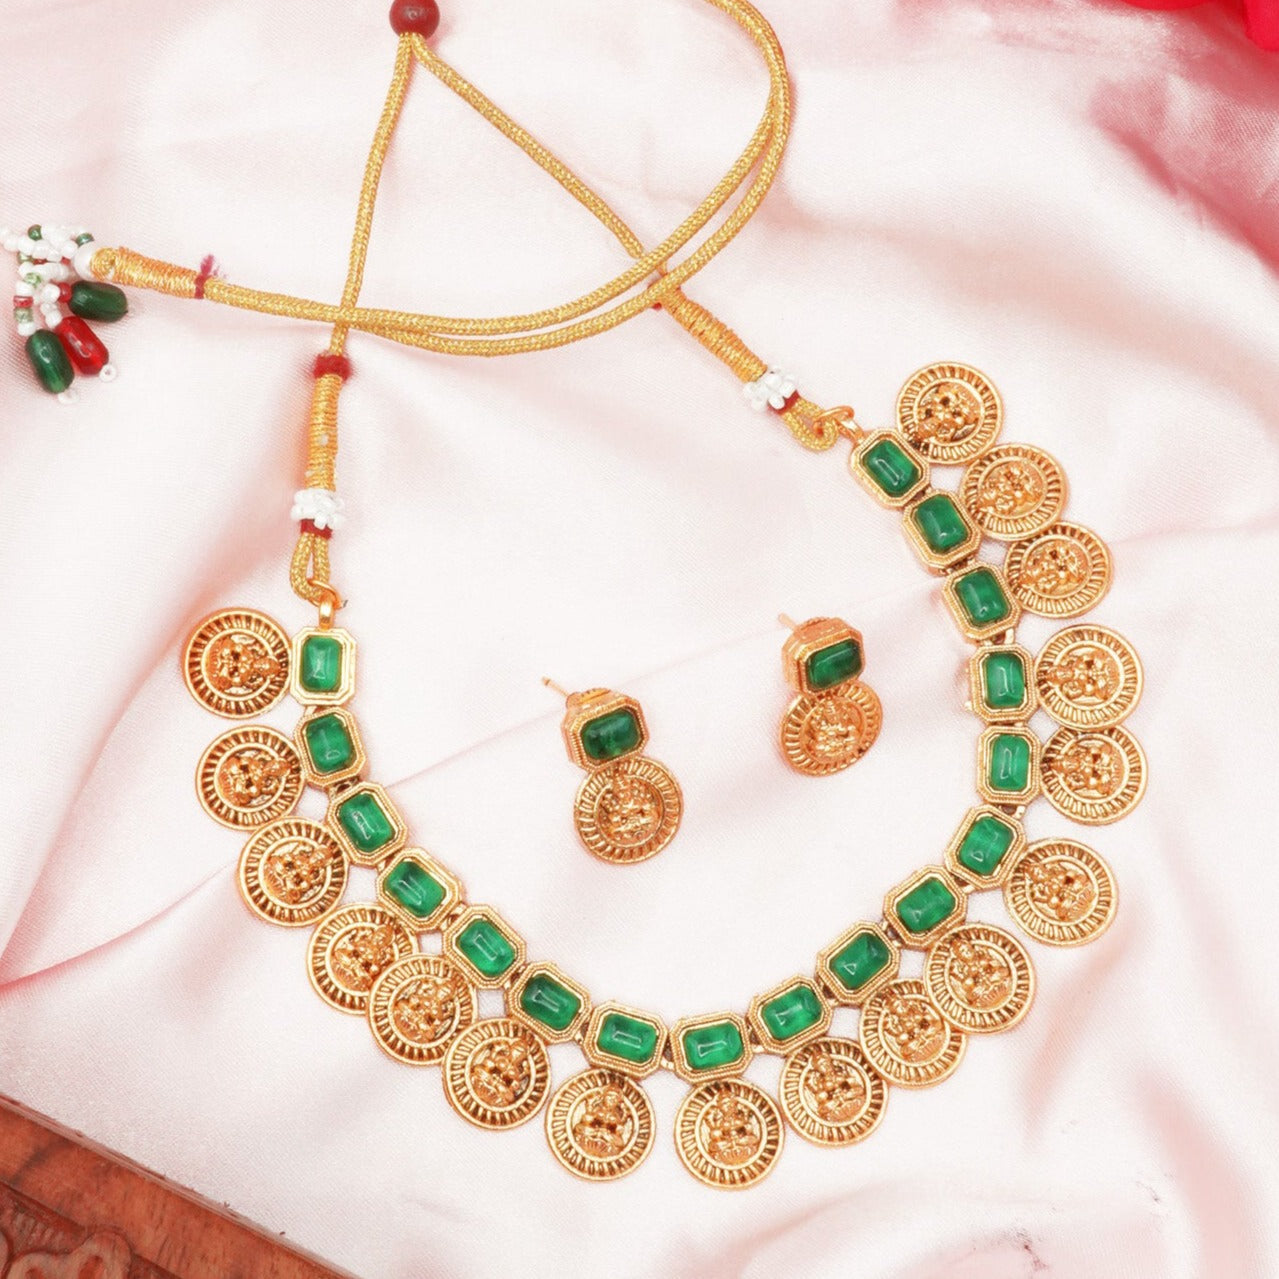 Gold Plated colored stone Necklace set 9494N